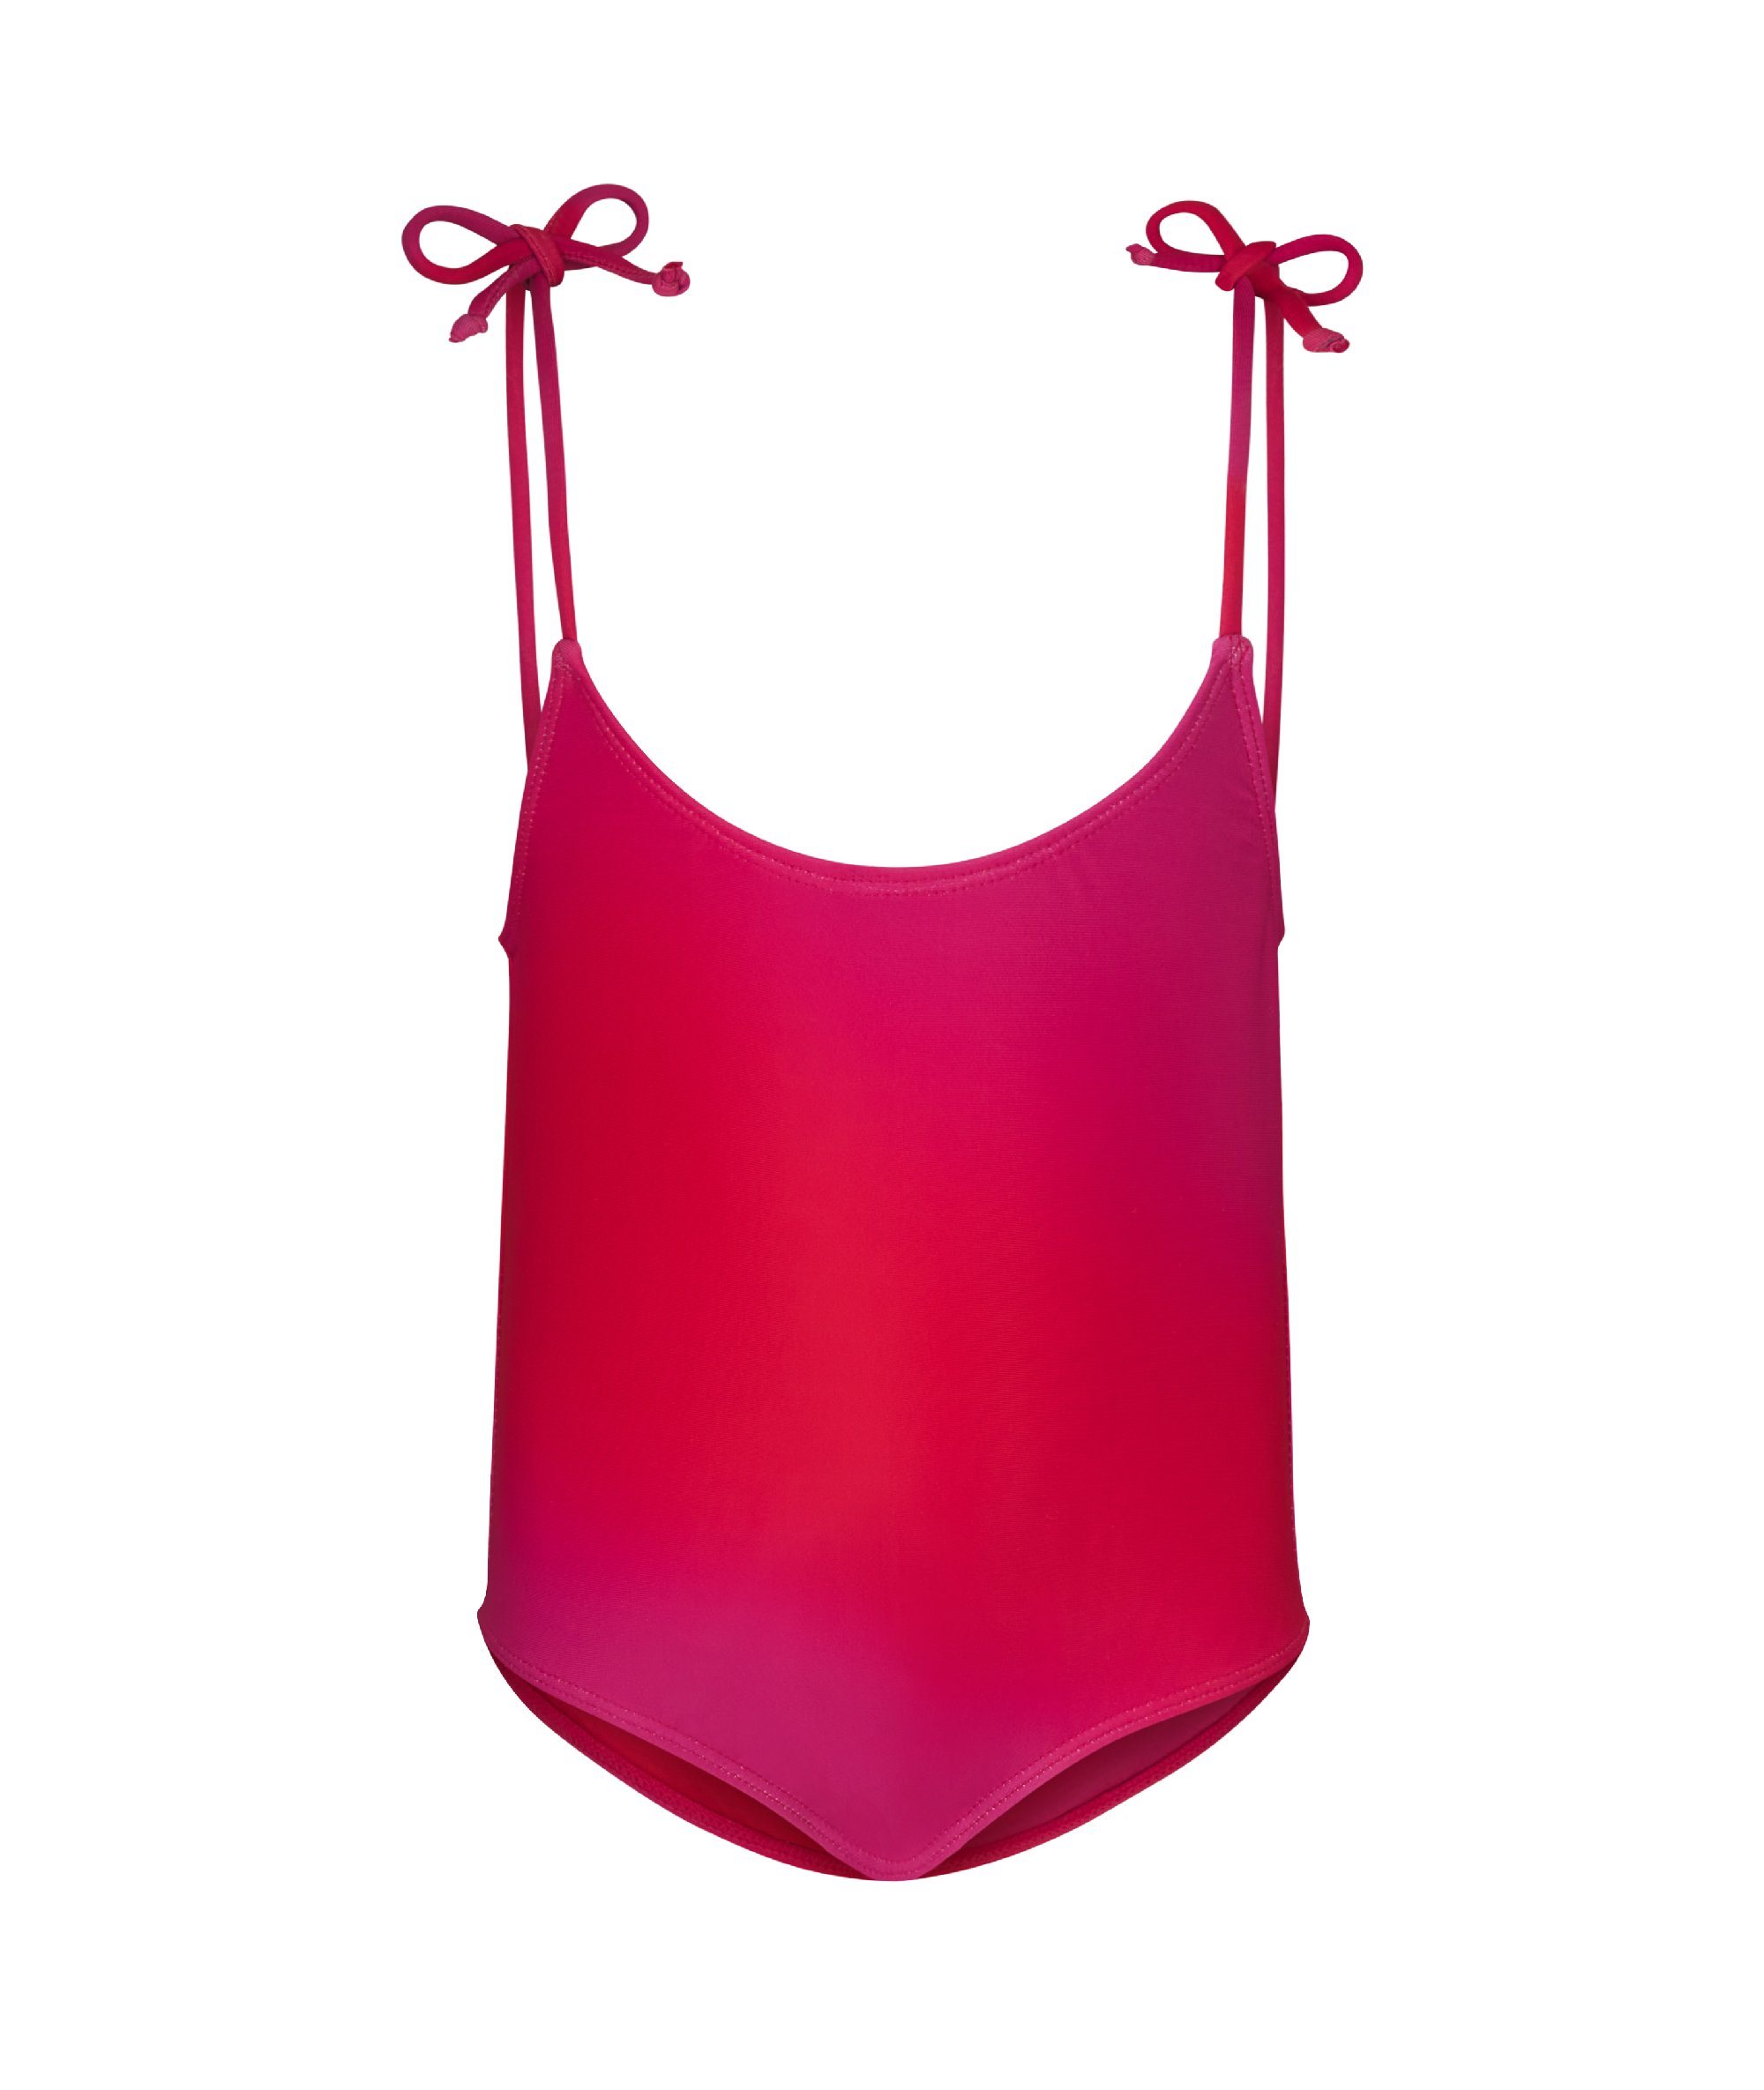 Kylie Swim Mini Swim Red/Pink Ombre Features Adjustable Straps and Doubled Lined Fabric.